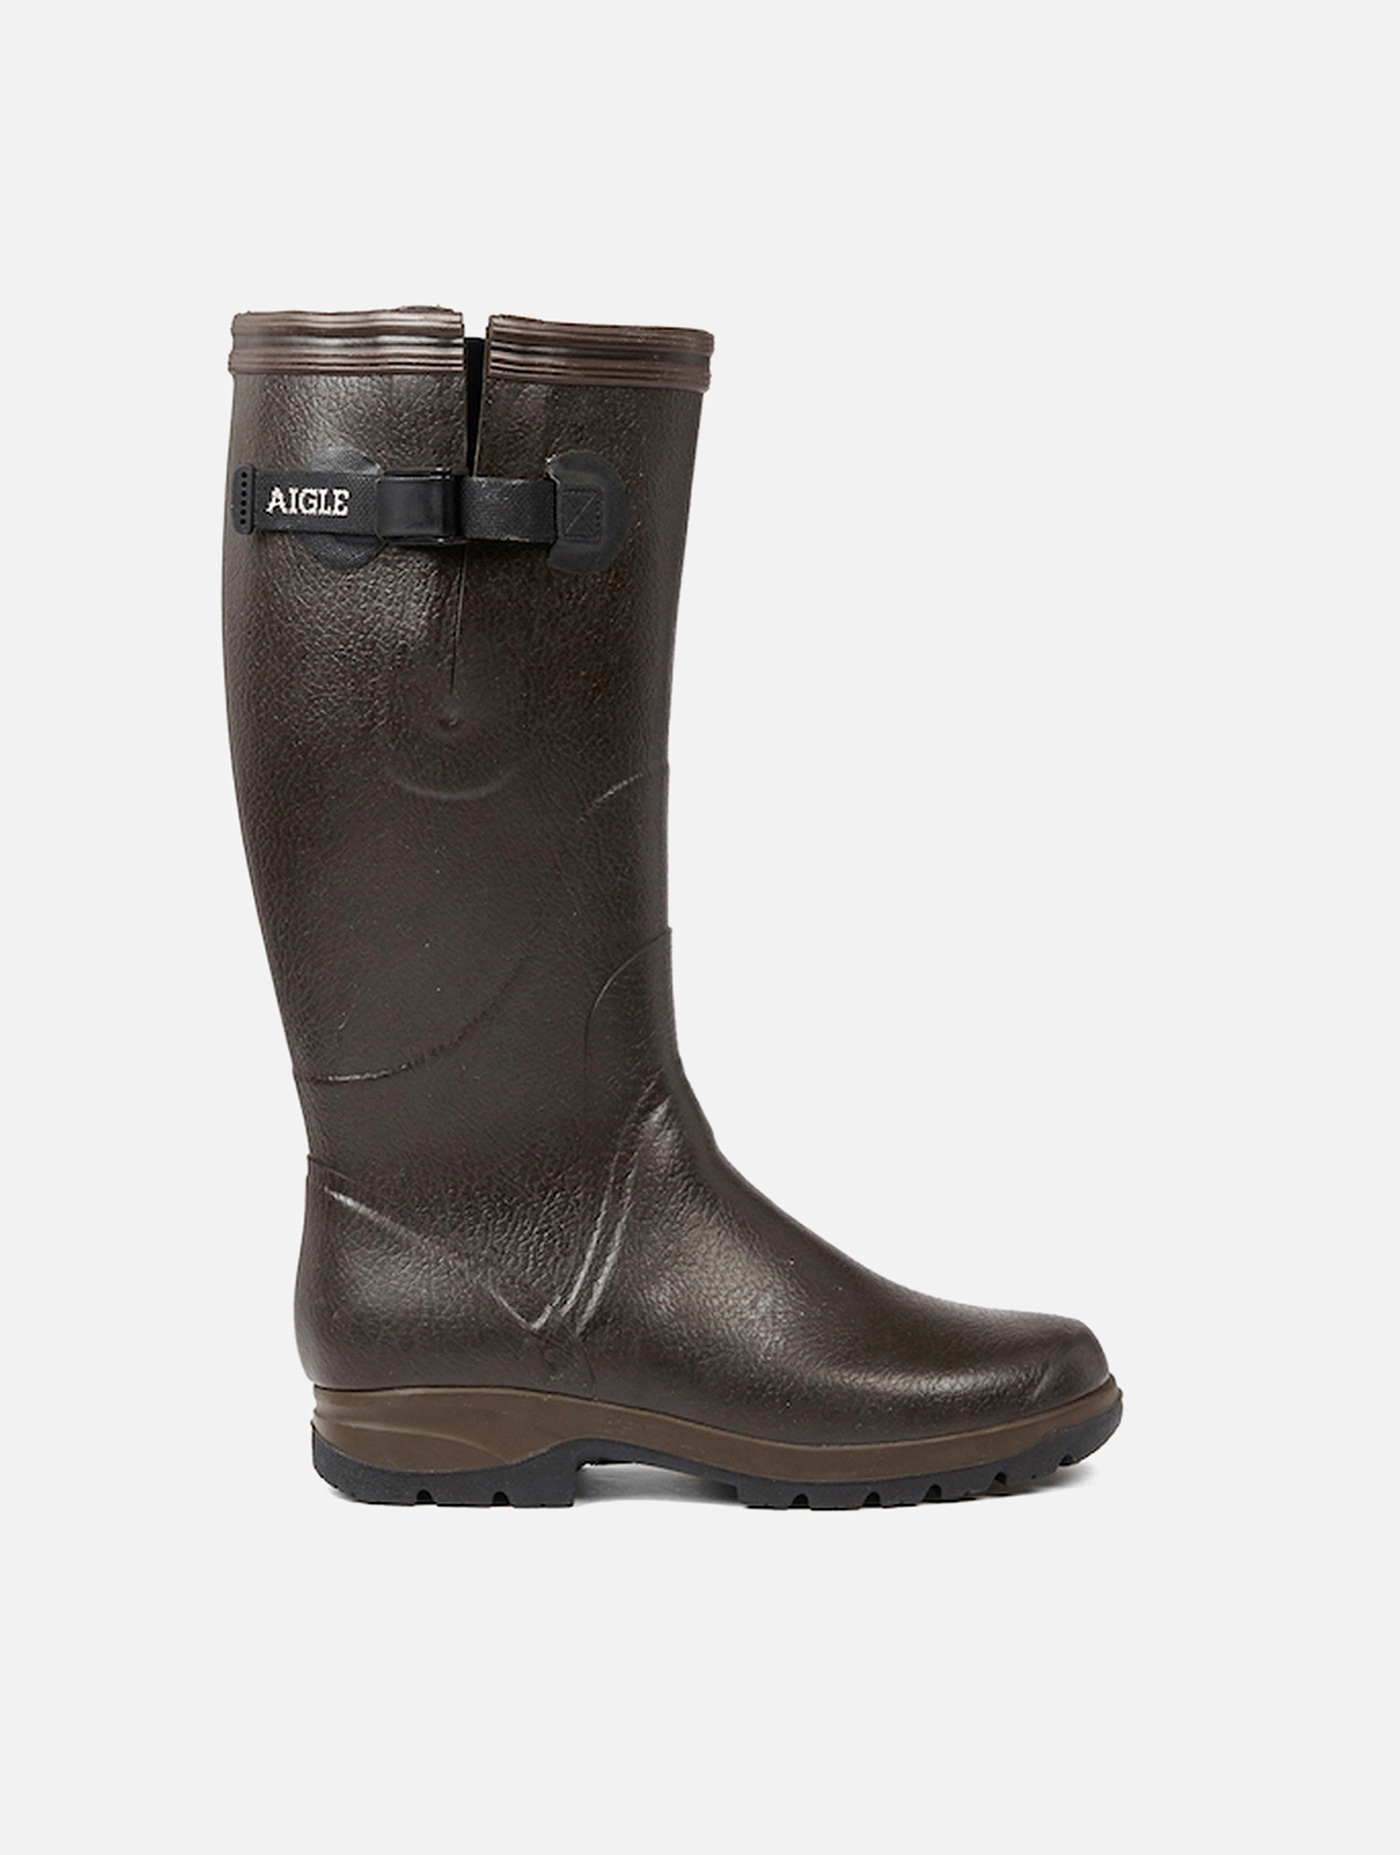 Farming boots for wide feet and calves, Made in Francemen | AIGLE